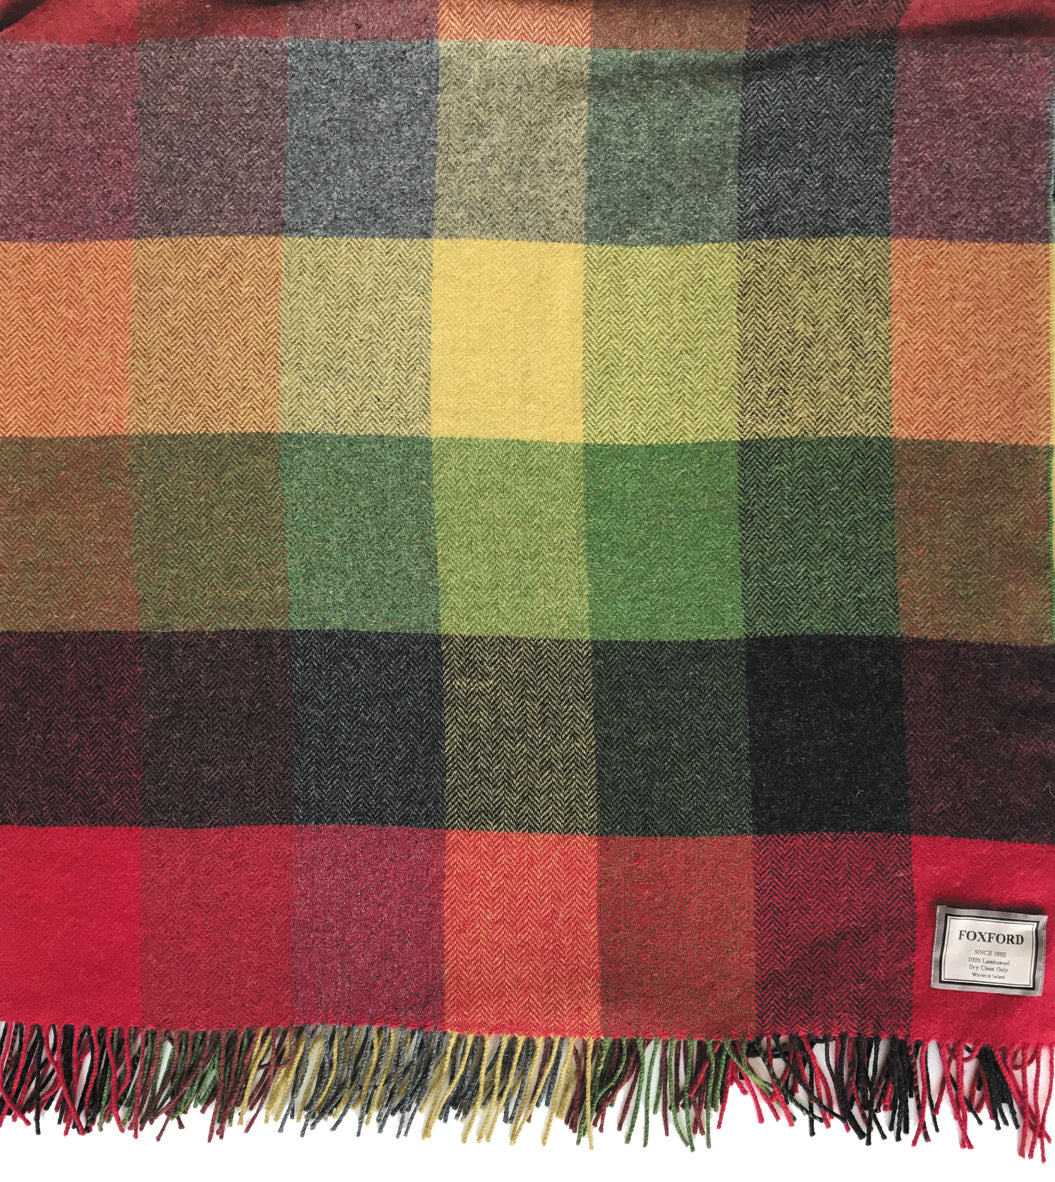 Lambswool throw in autumn check, heritage multi block throw from Foxford